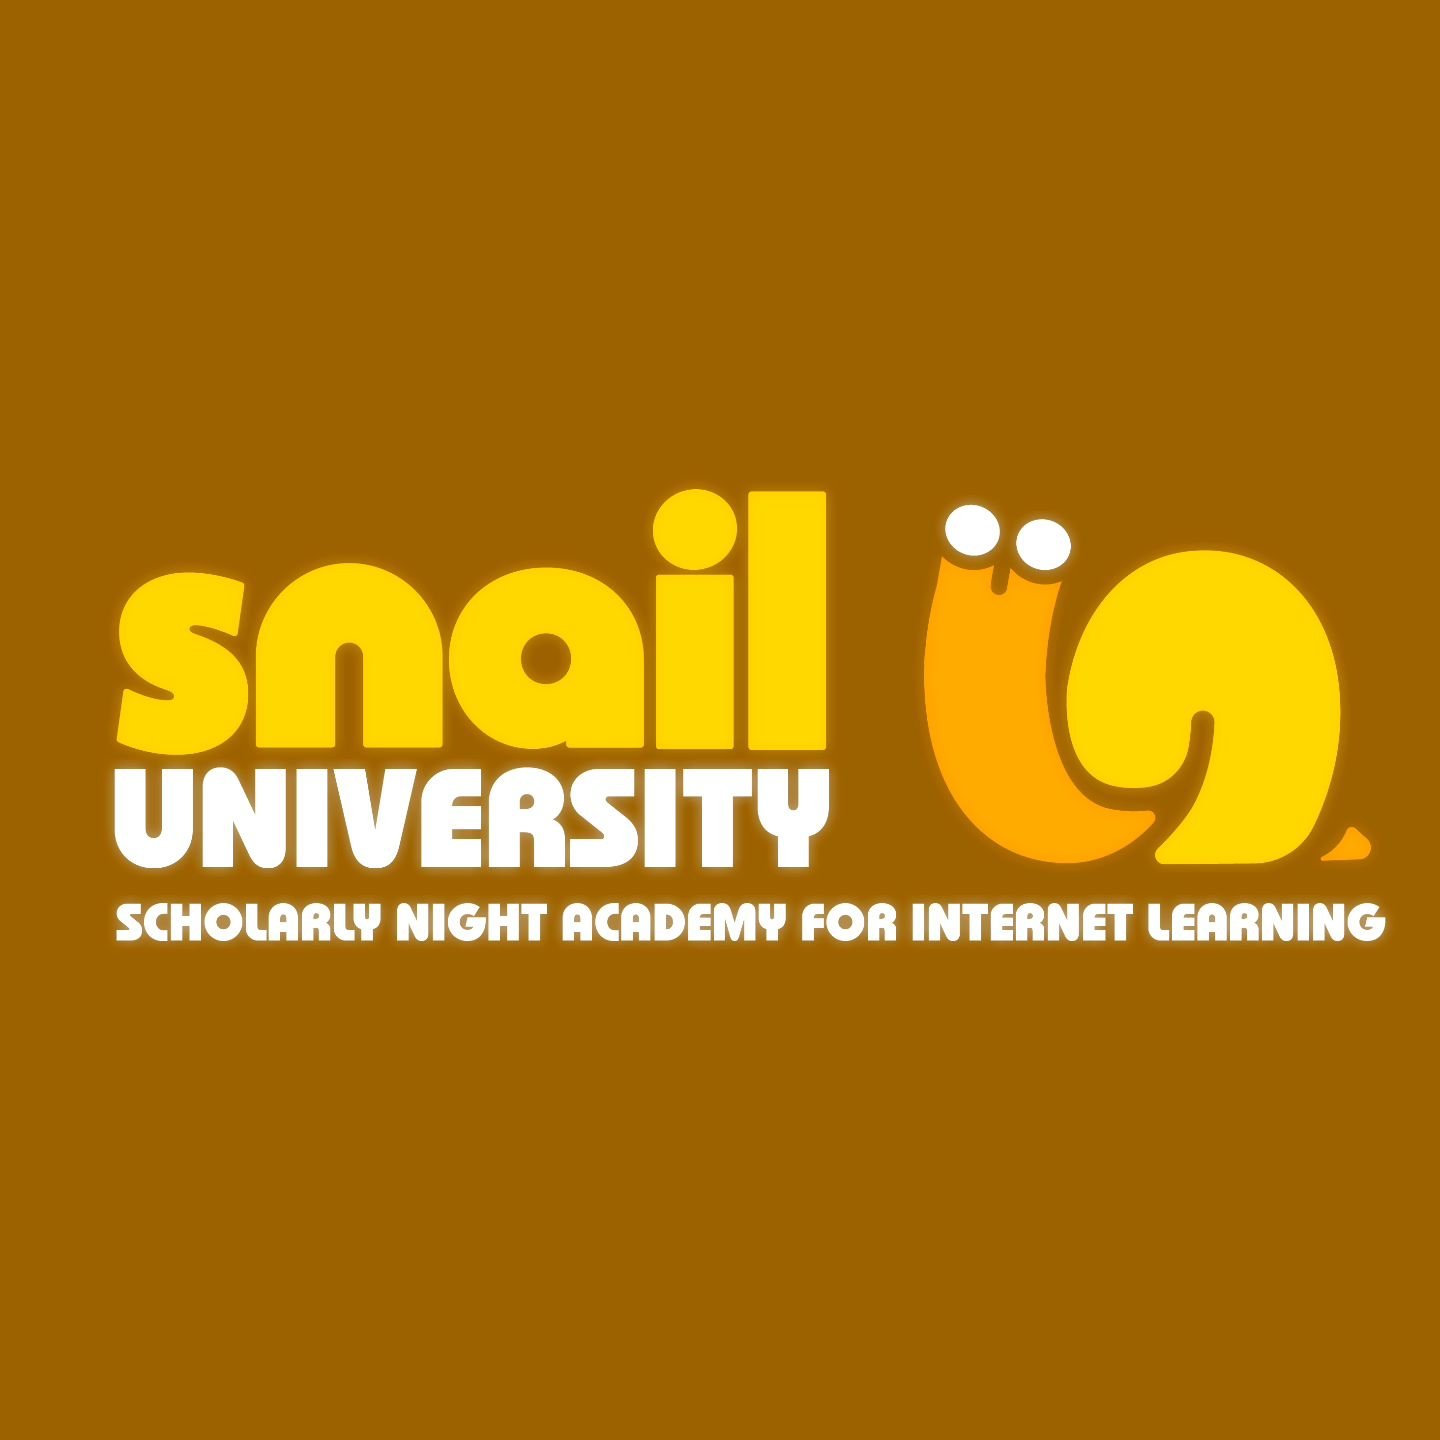 i founded S.N.A.I.L. U, the internet's premiere learning hangout group university as a way to learn new software years ago. the classes are small and we haven't met in forever, but heres a logo treatment i designed for it.

#logo
#design
#snail
#icon